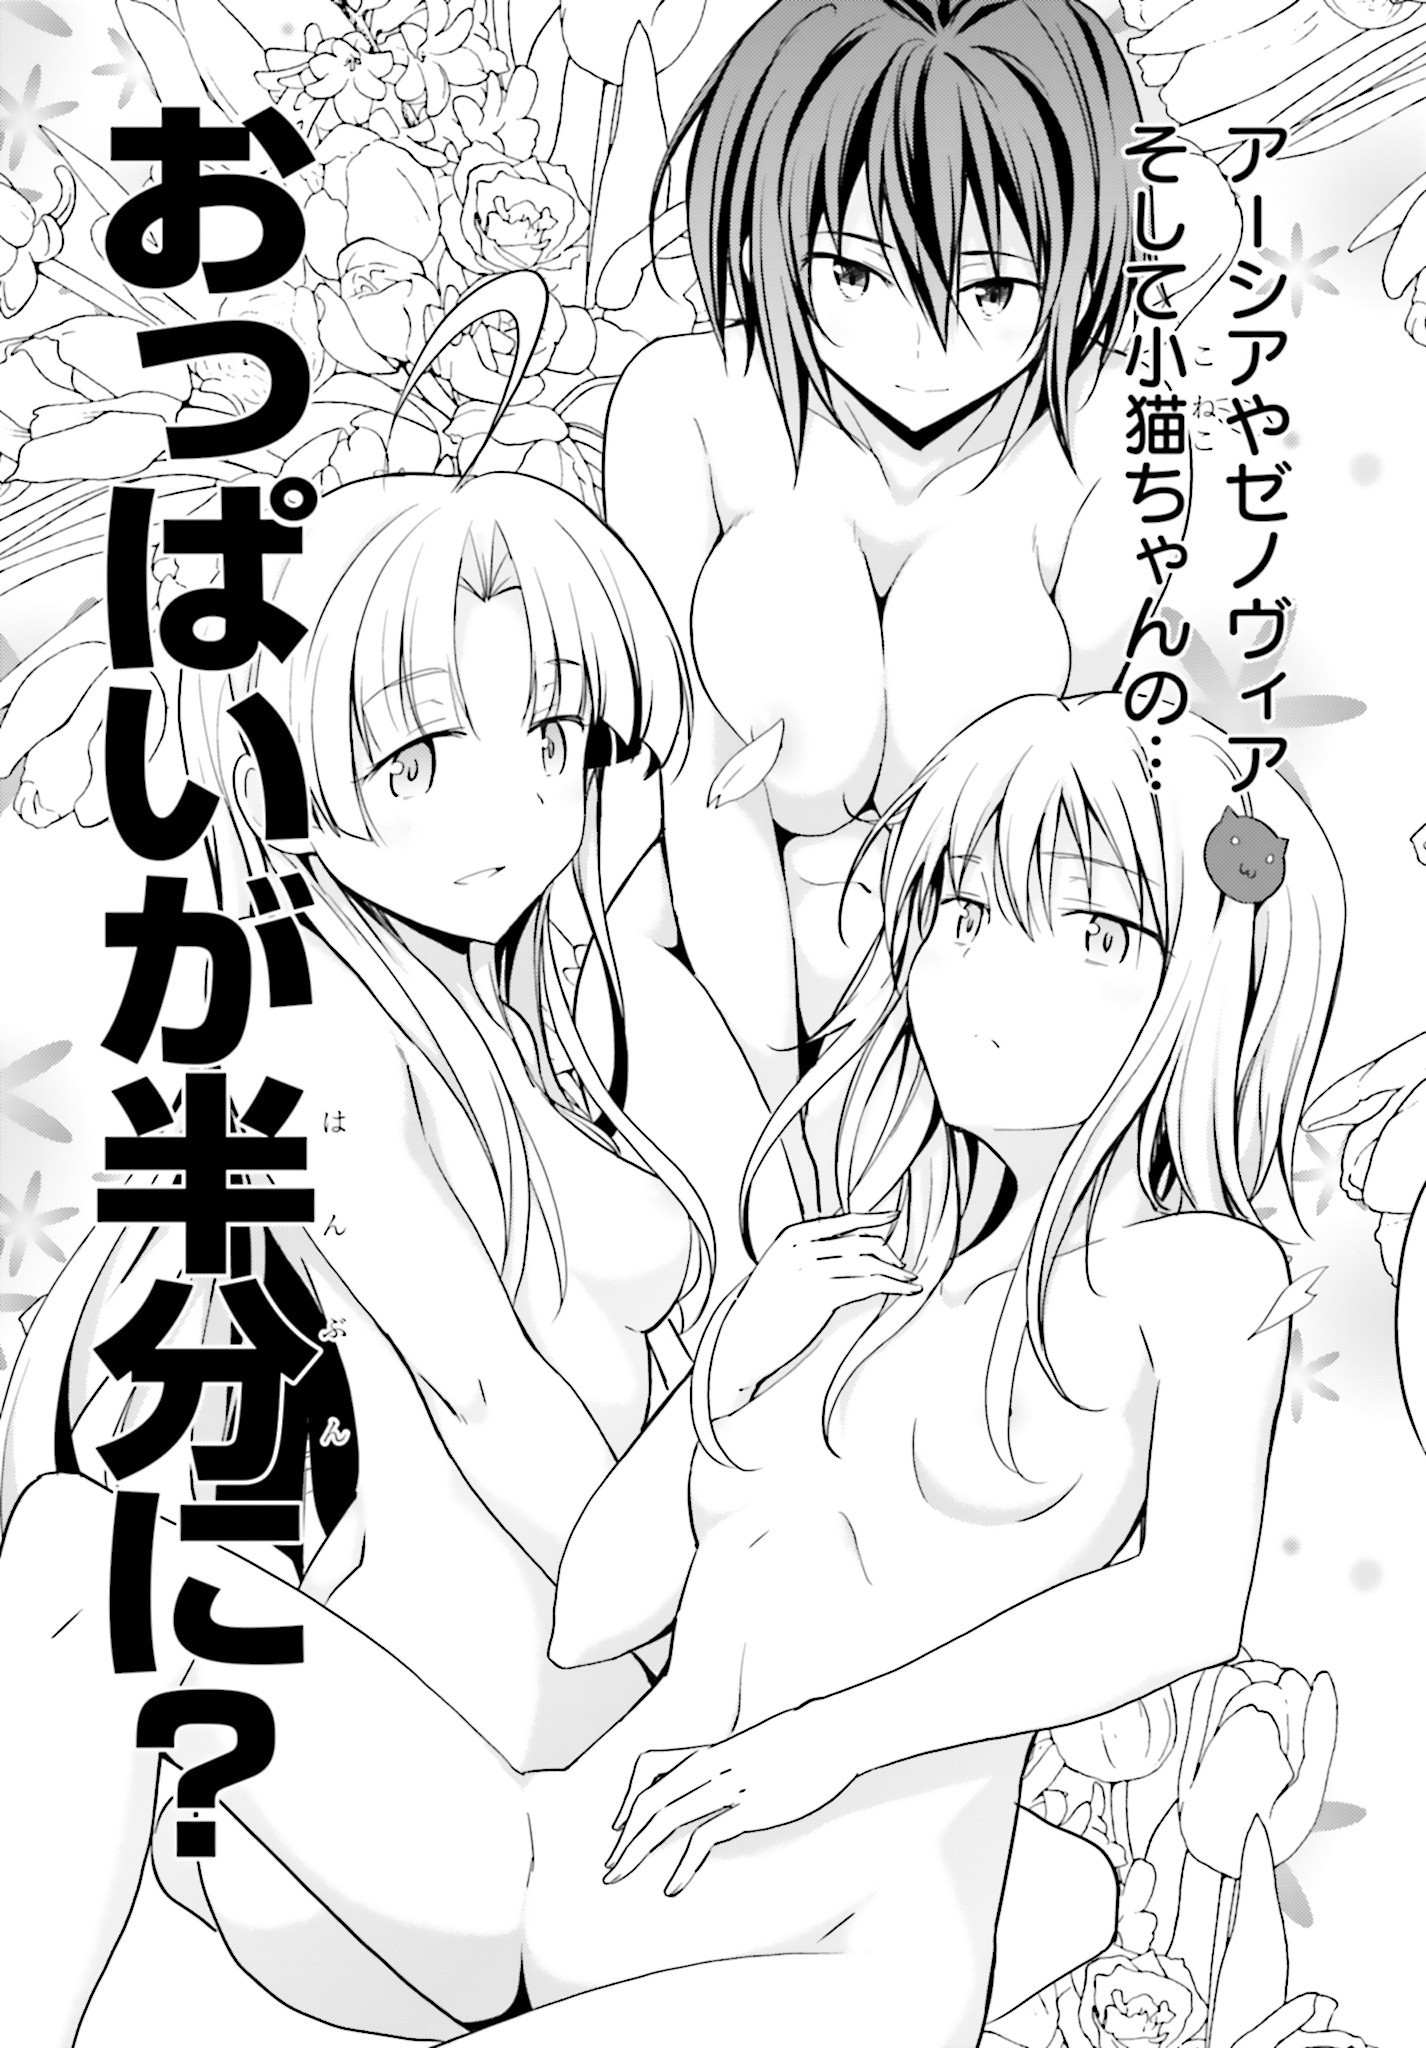 High-School DxD - ハイスクールD×D - Chapter 48 - Page 20